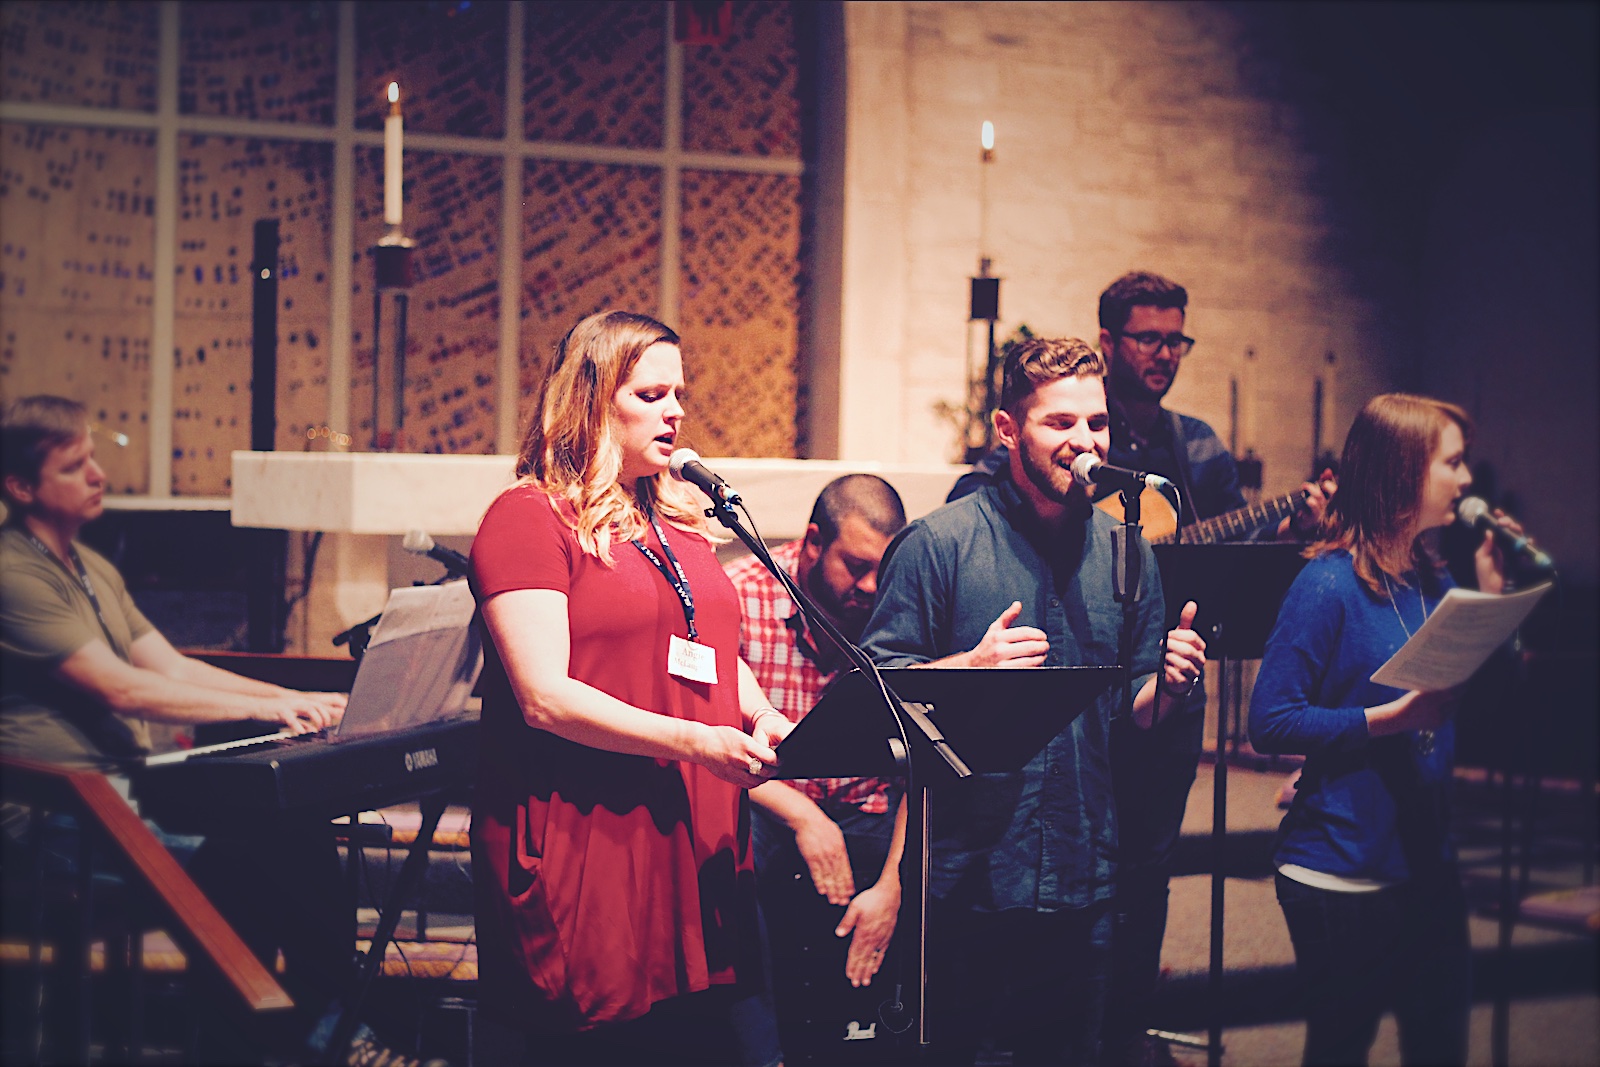 IWS students lead worship in a practicum